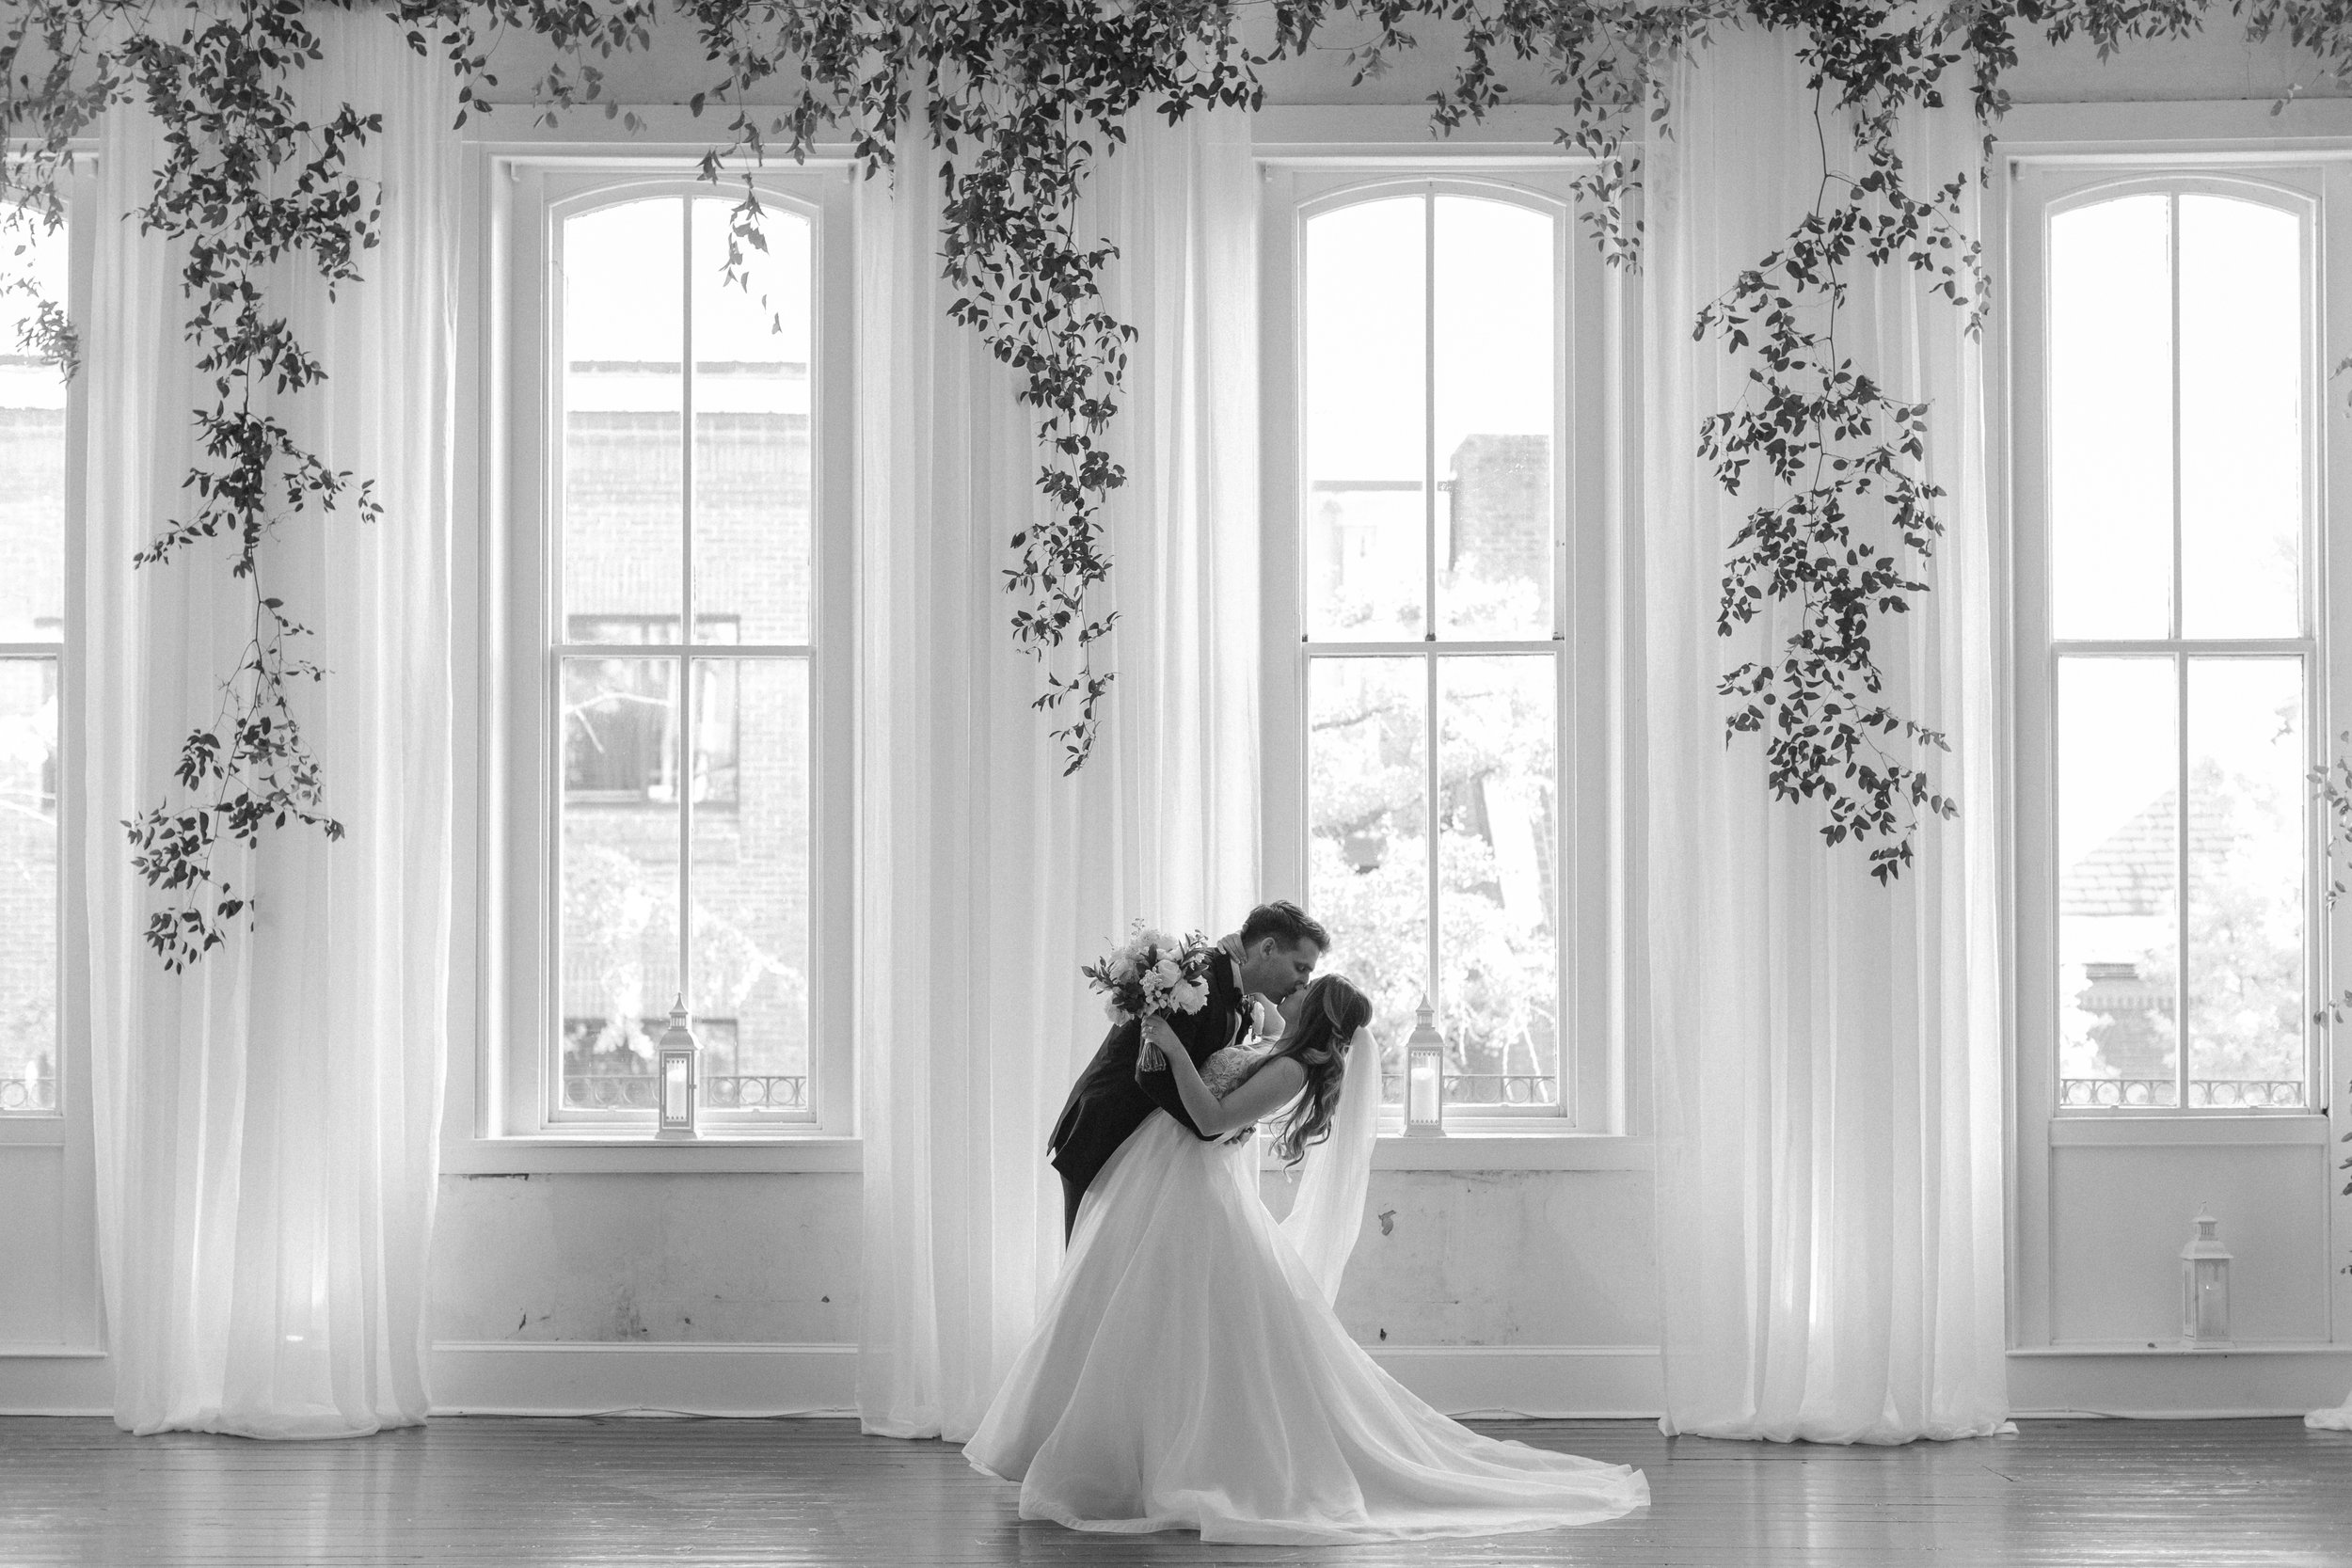 Bride and groom dramatic kiss in front of large windows with greenery hanging